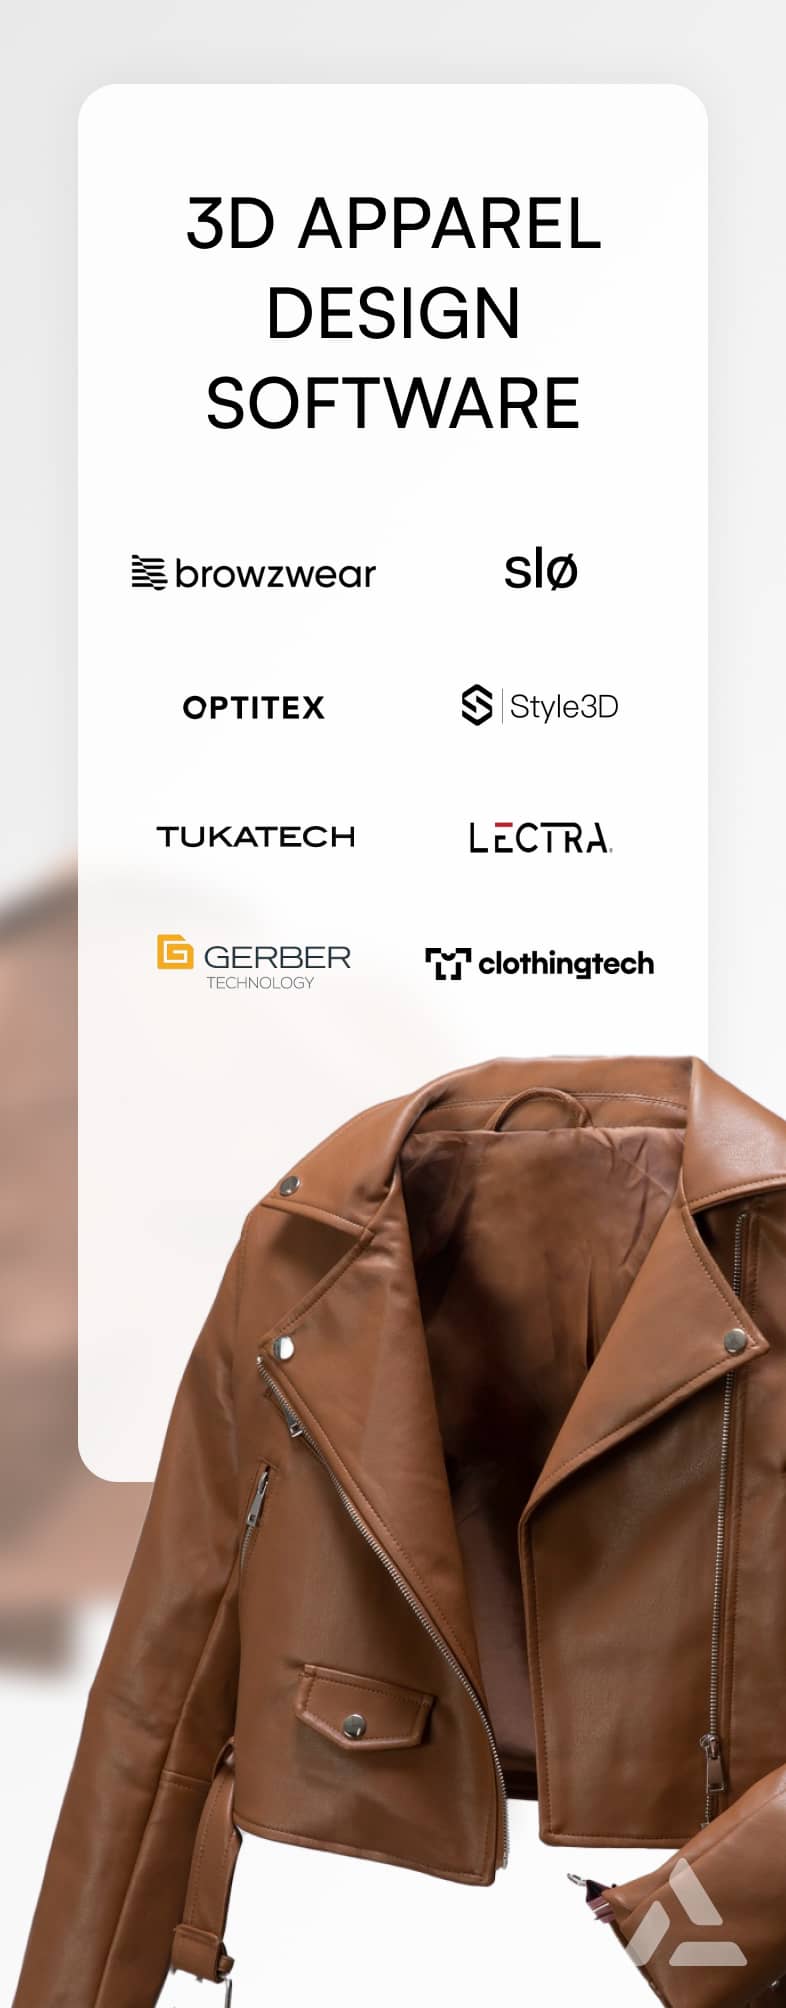 Promotional poster for on-demand fashion design software featuring a close-up of a brown leather jacket, with logos of various tech companies below.